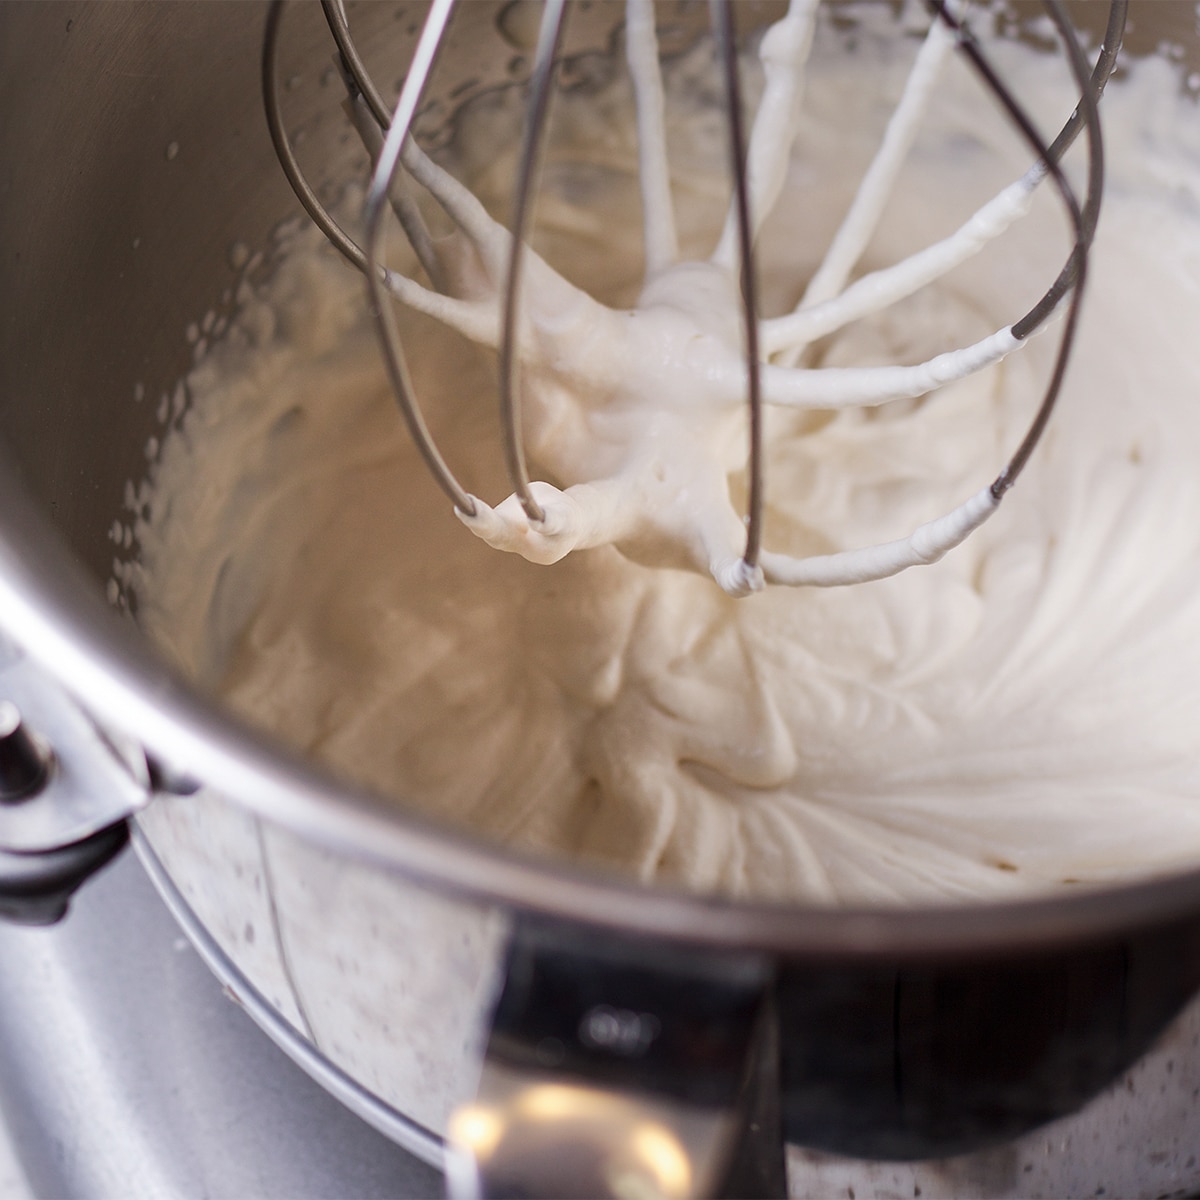 Looking down into the bowl of a stand mixer filled with whipped cream.